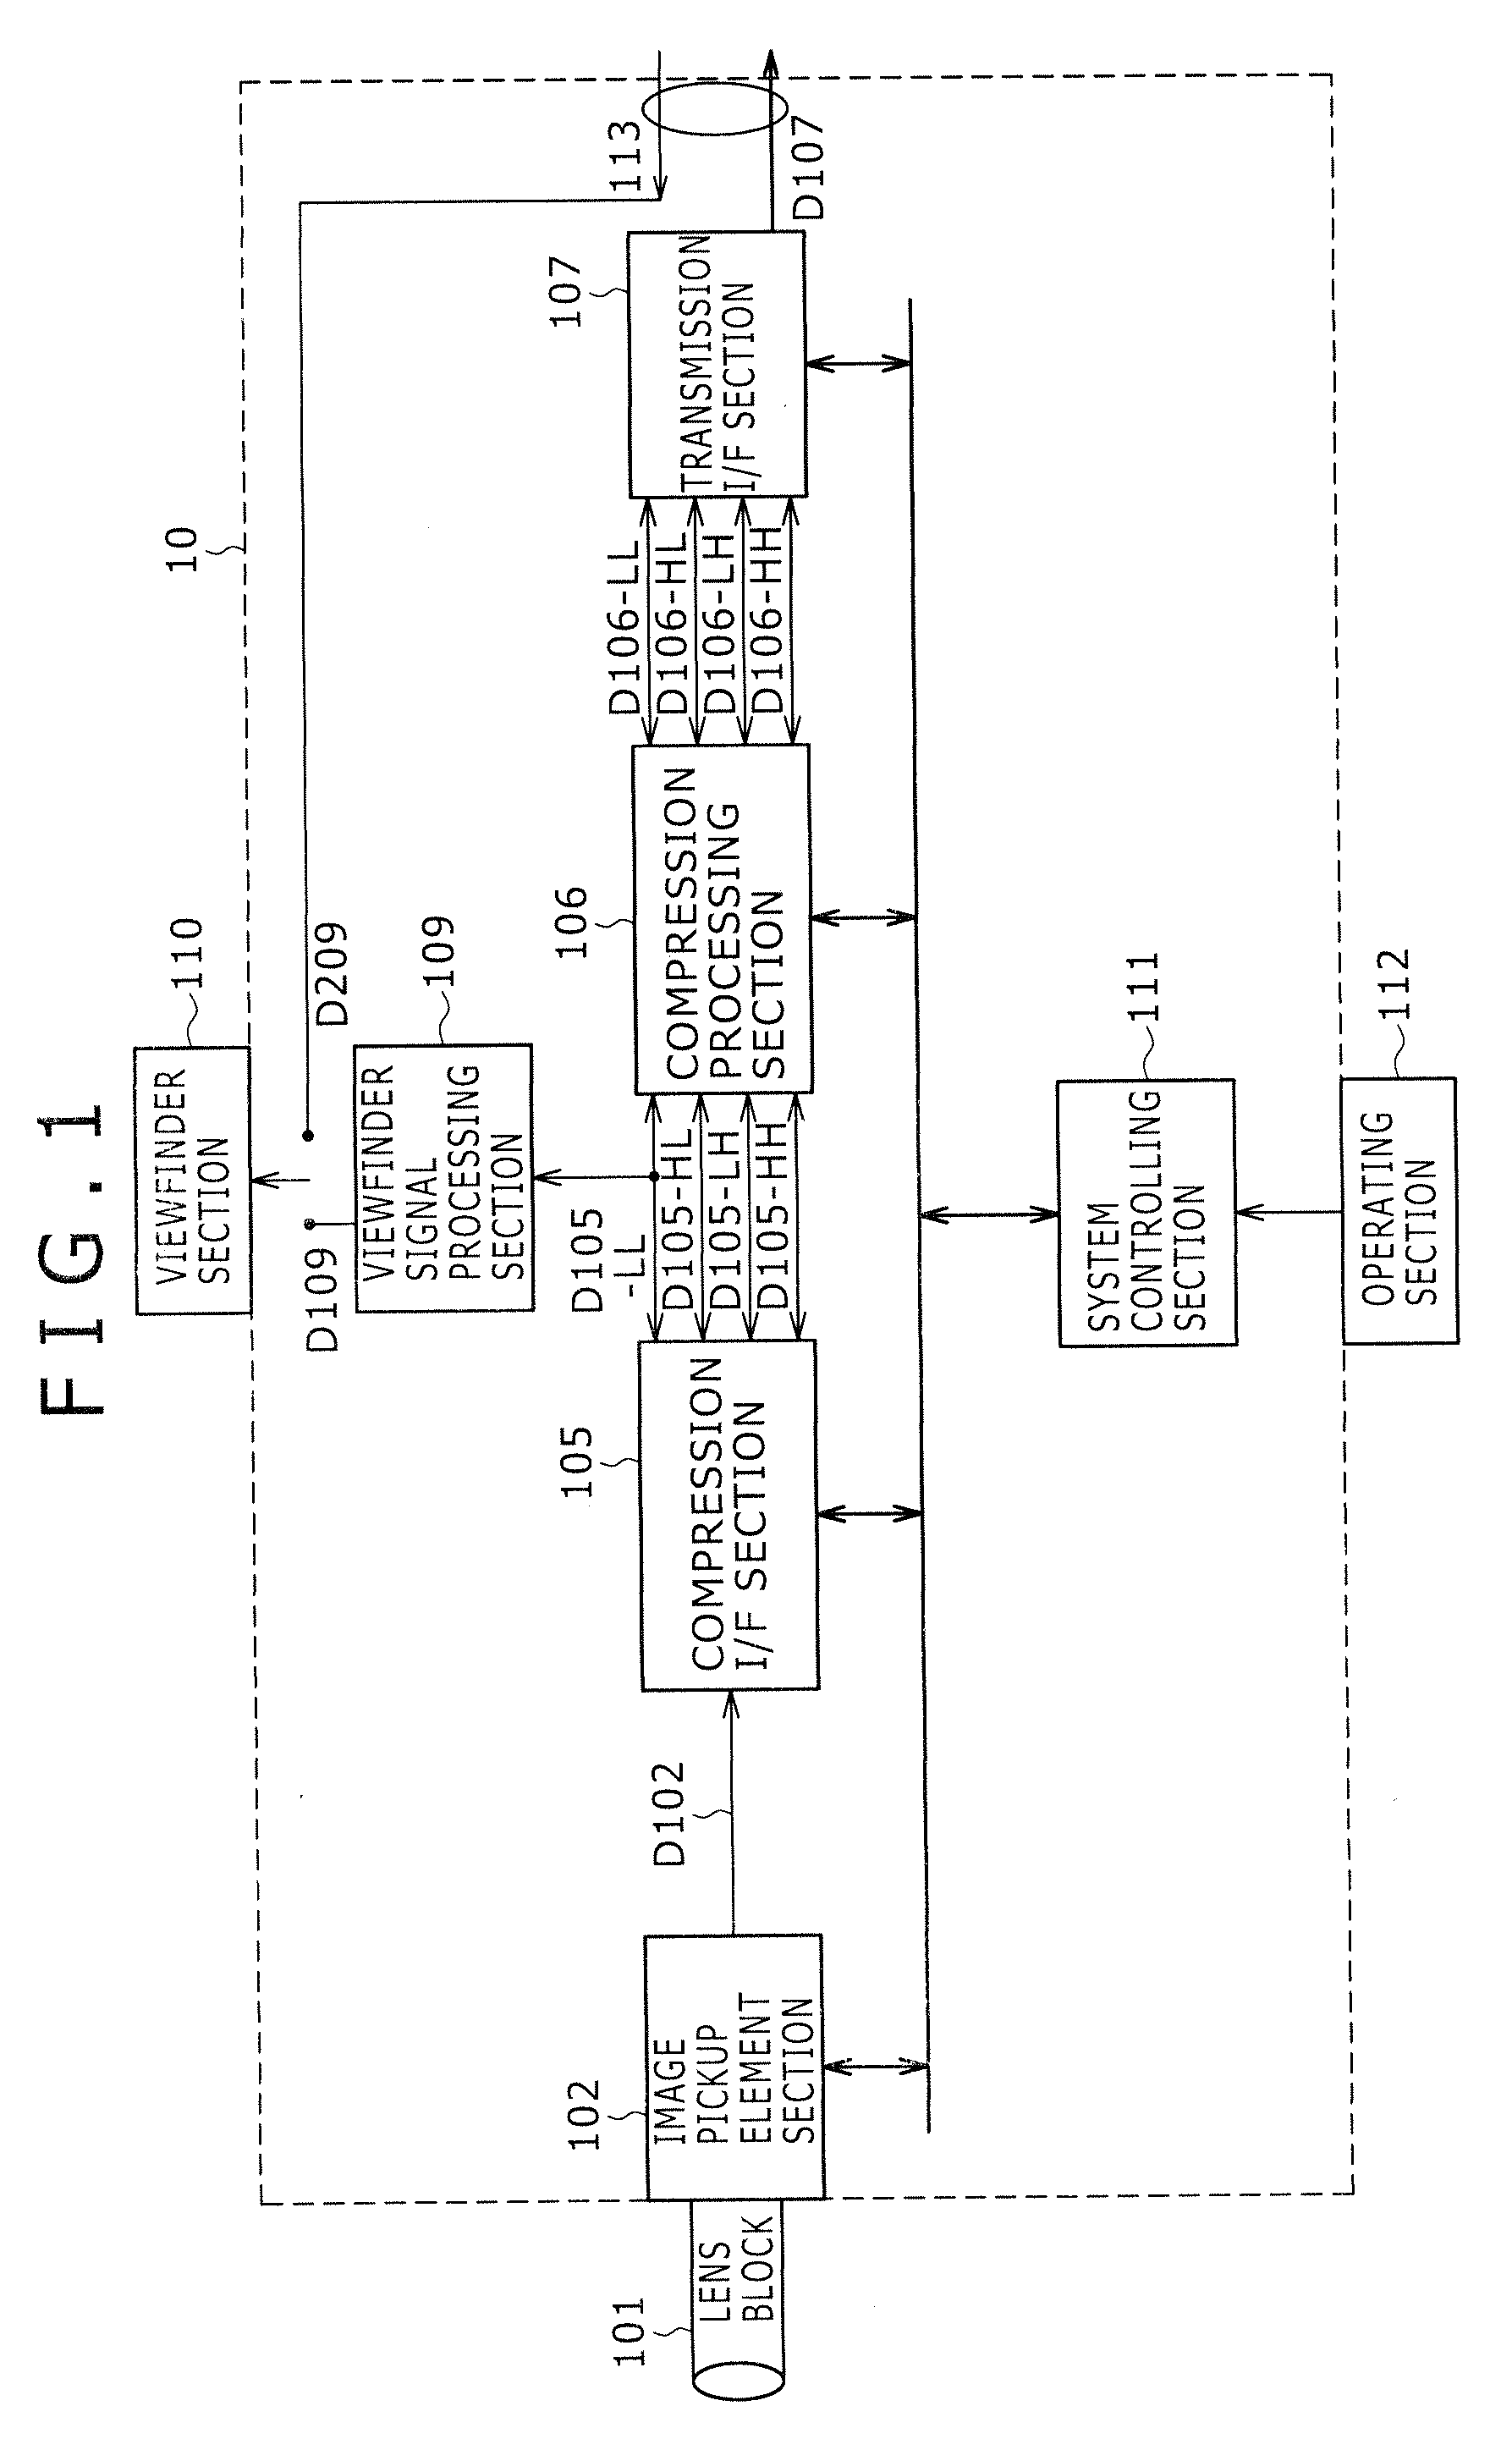 Camera system and image processing method